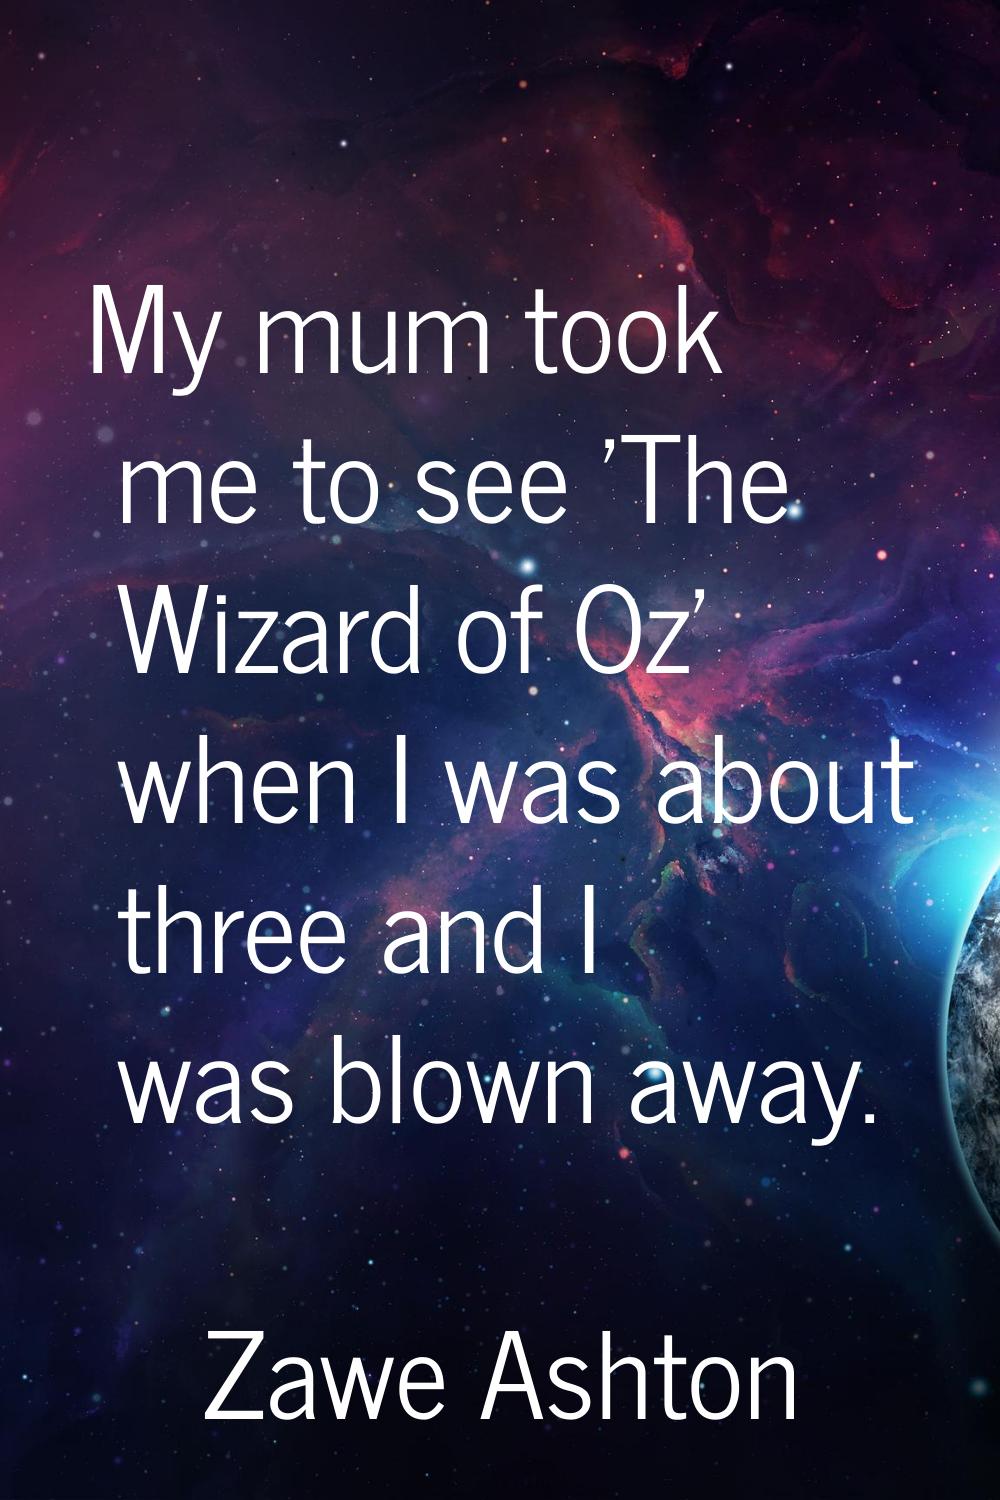 My mum took me to see 'The Wizard of Oz' when I was about three and I was blown away.